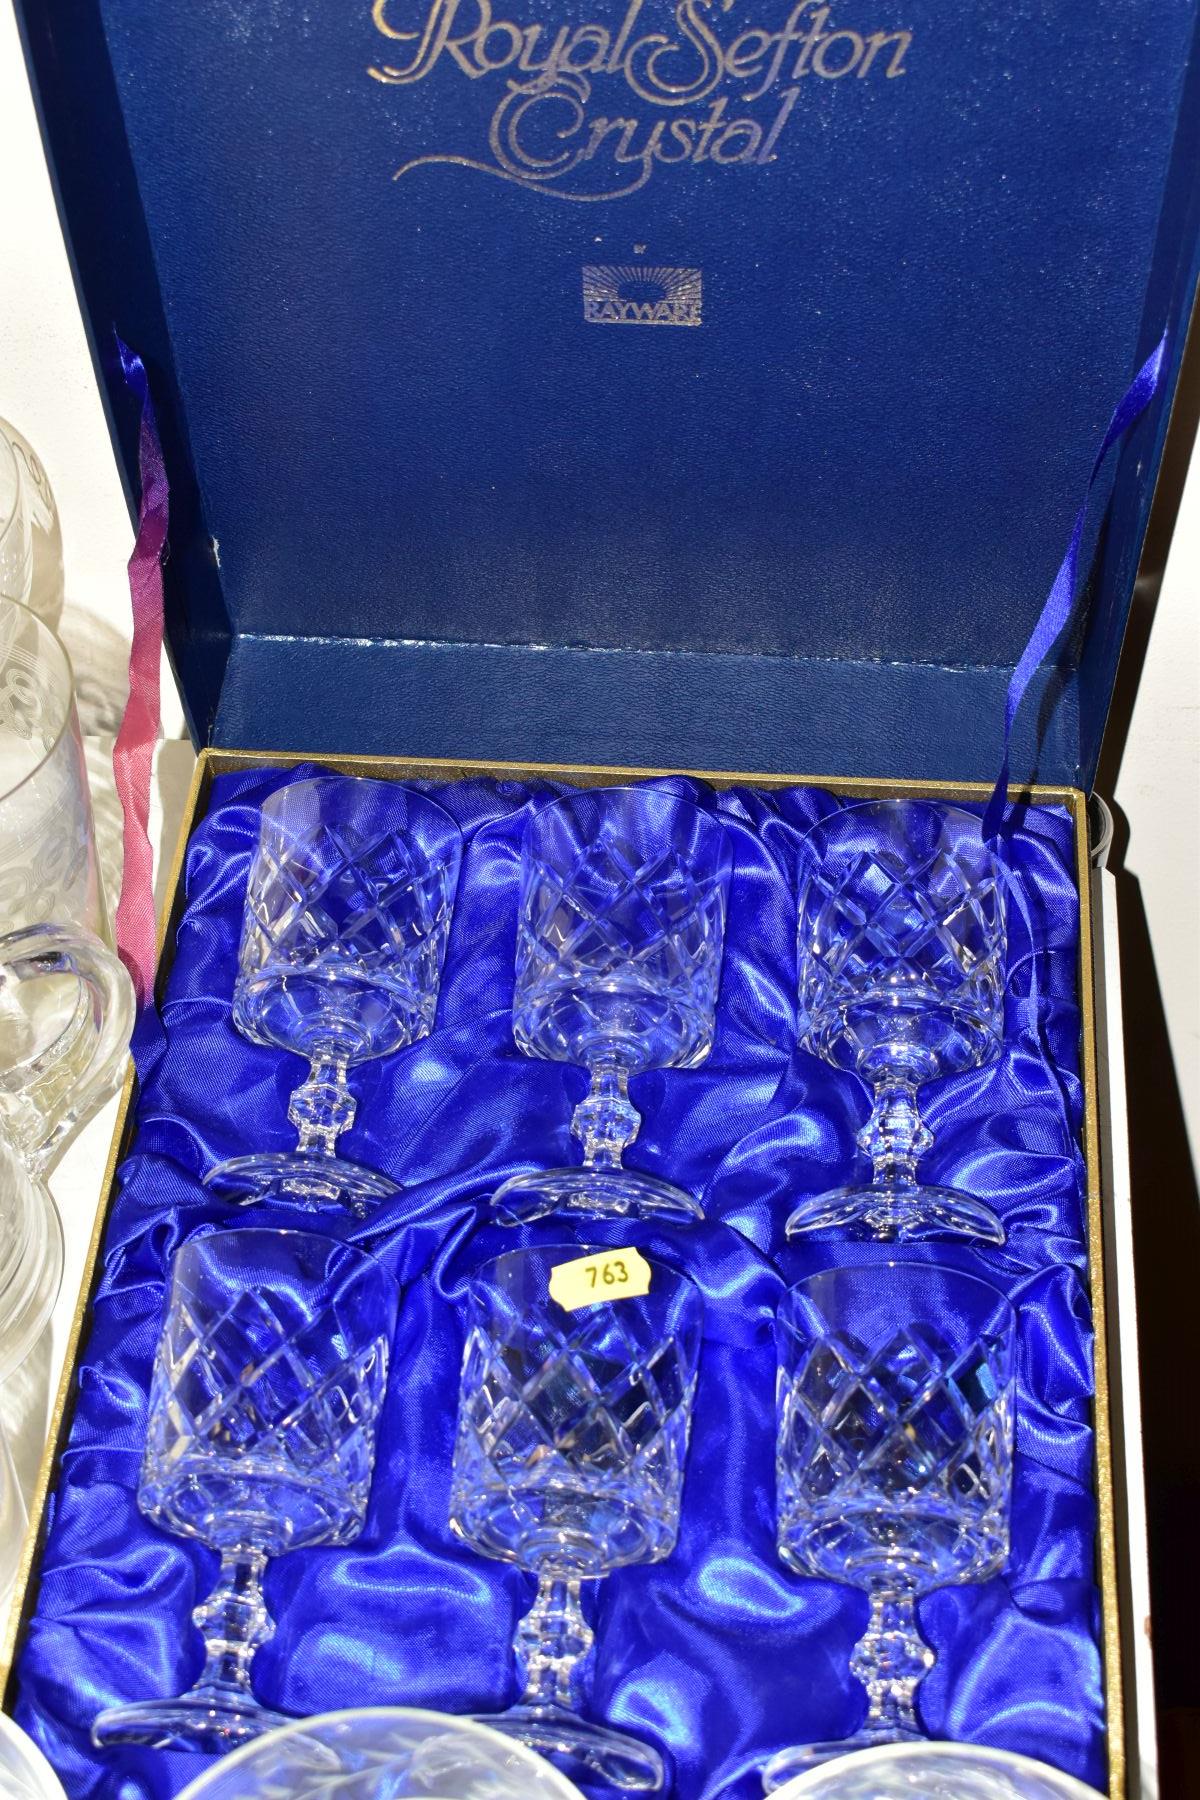 A LARGE COLLECTION OF DRINKING GLASSES, FIVE DECANTERS, A BOXED SET OF ROYAL SEFTON CRYSTAL WINE - Bild 6 aus 7